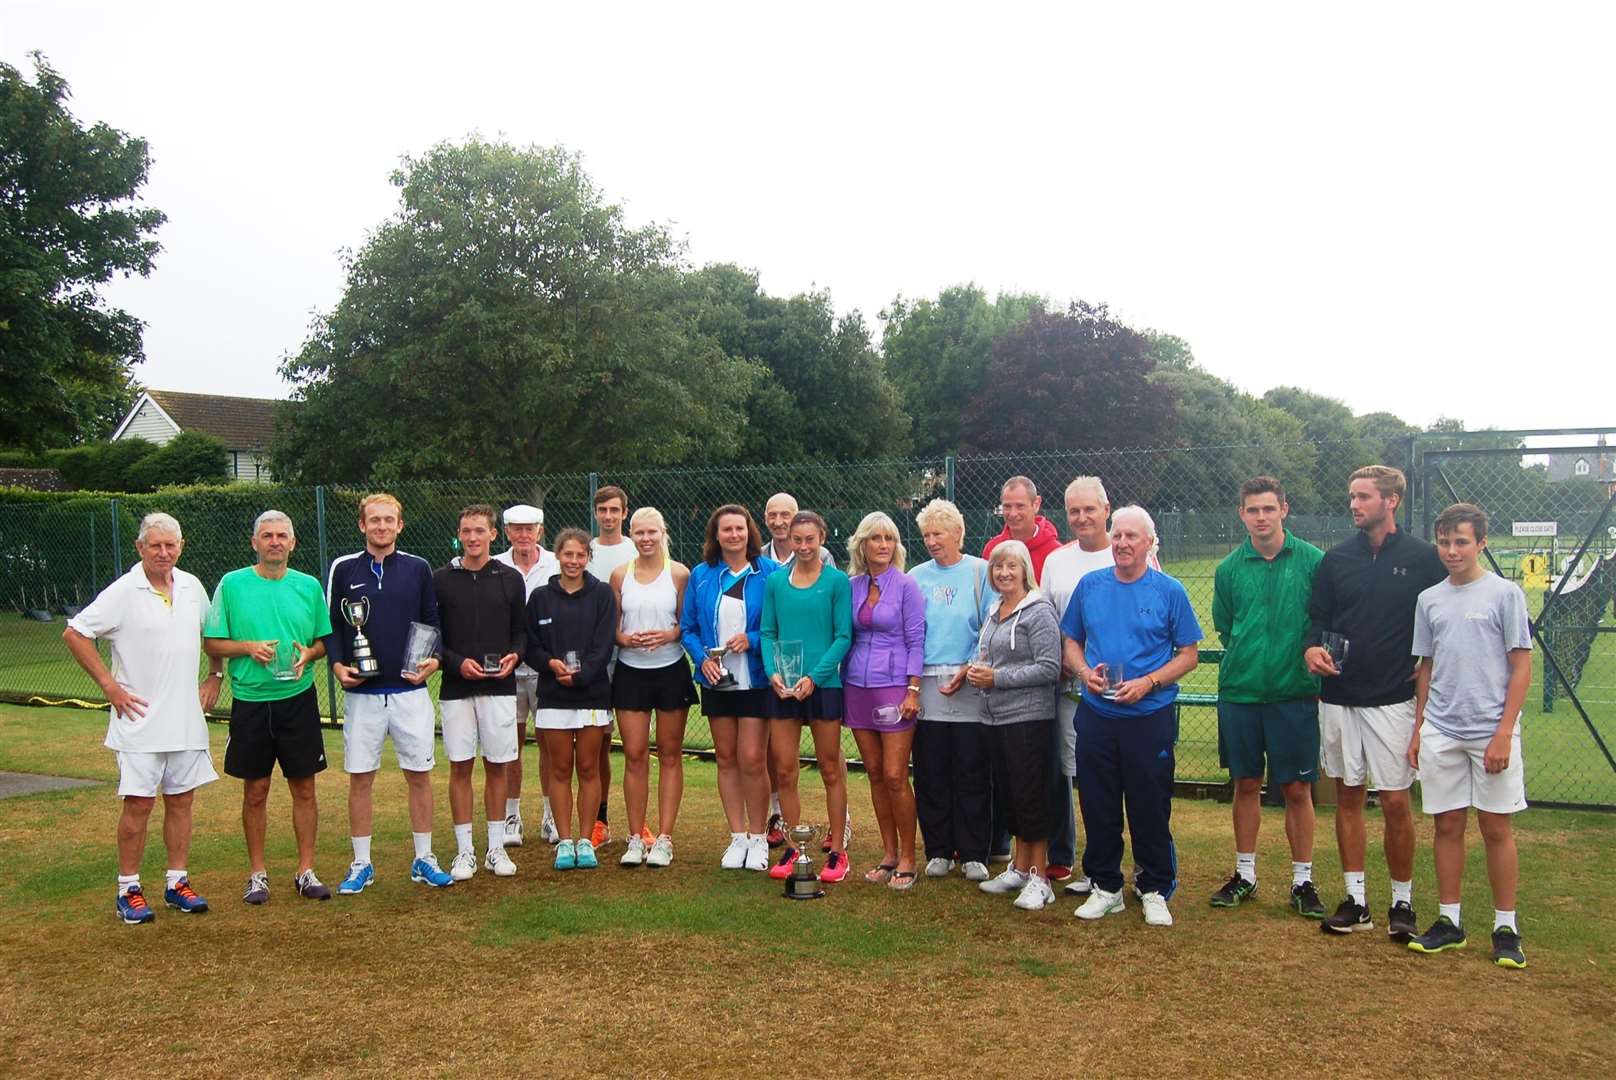 Players in the 2018 tournament. Picture: Walmer Lawn Tennis & Croquet Club